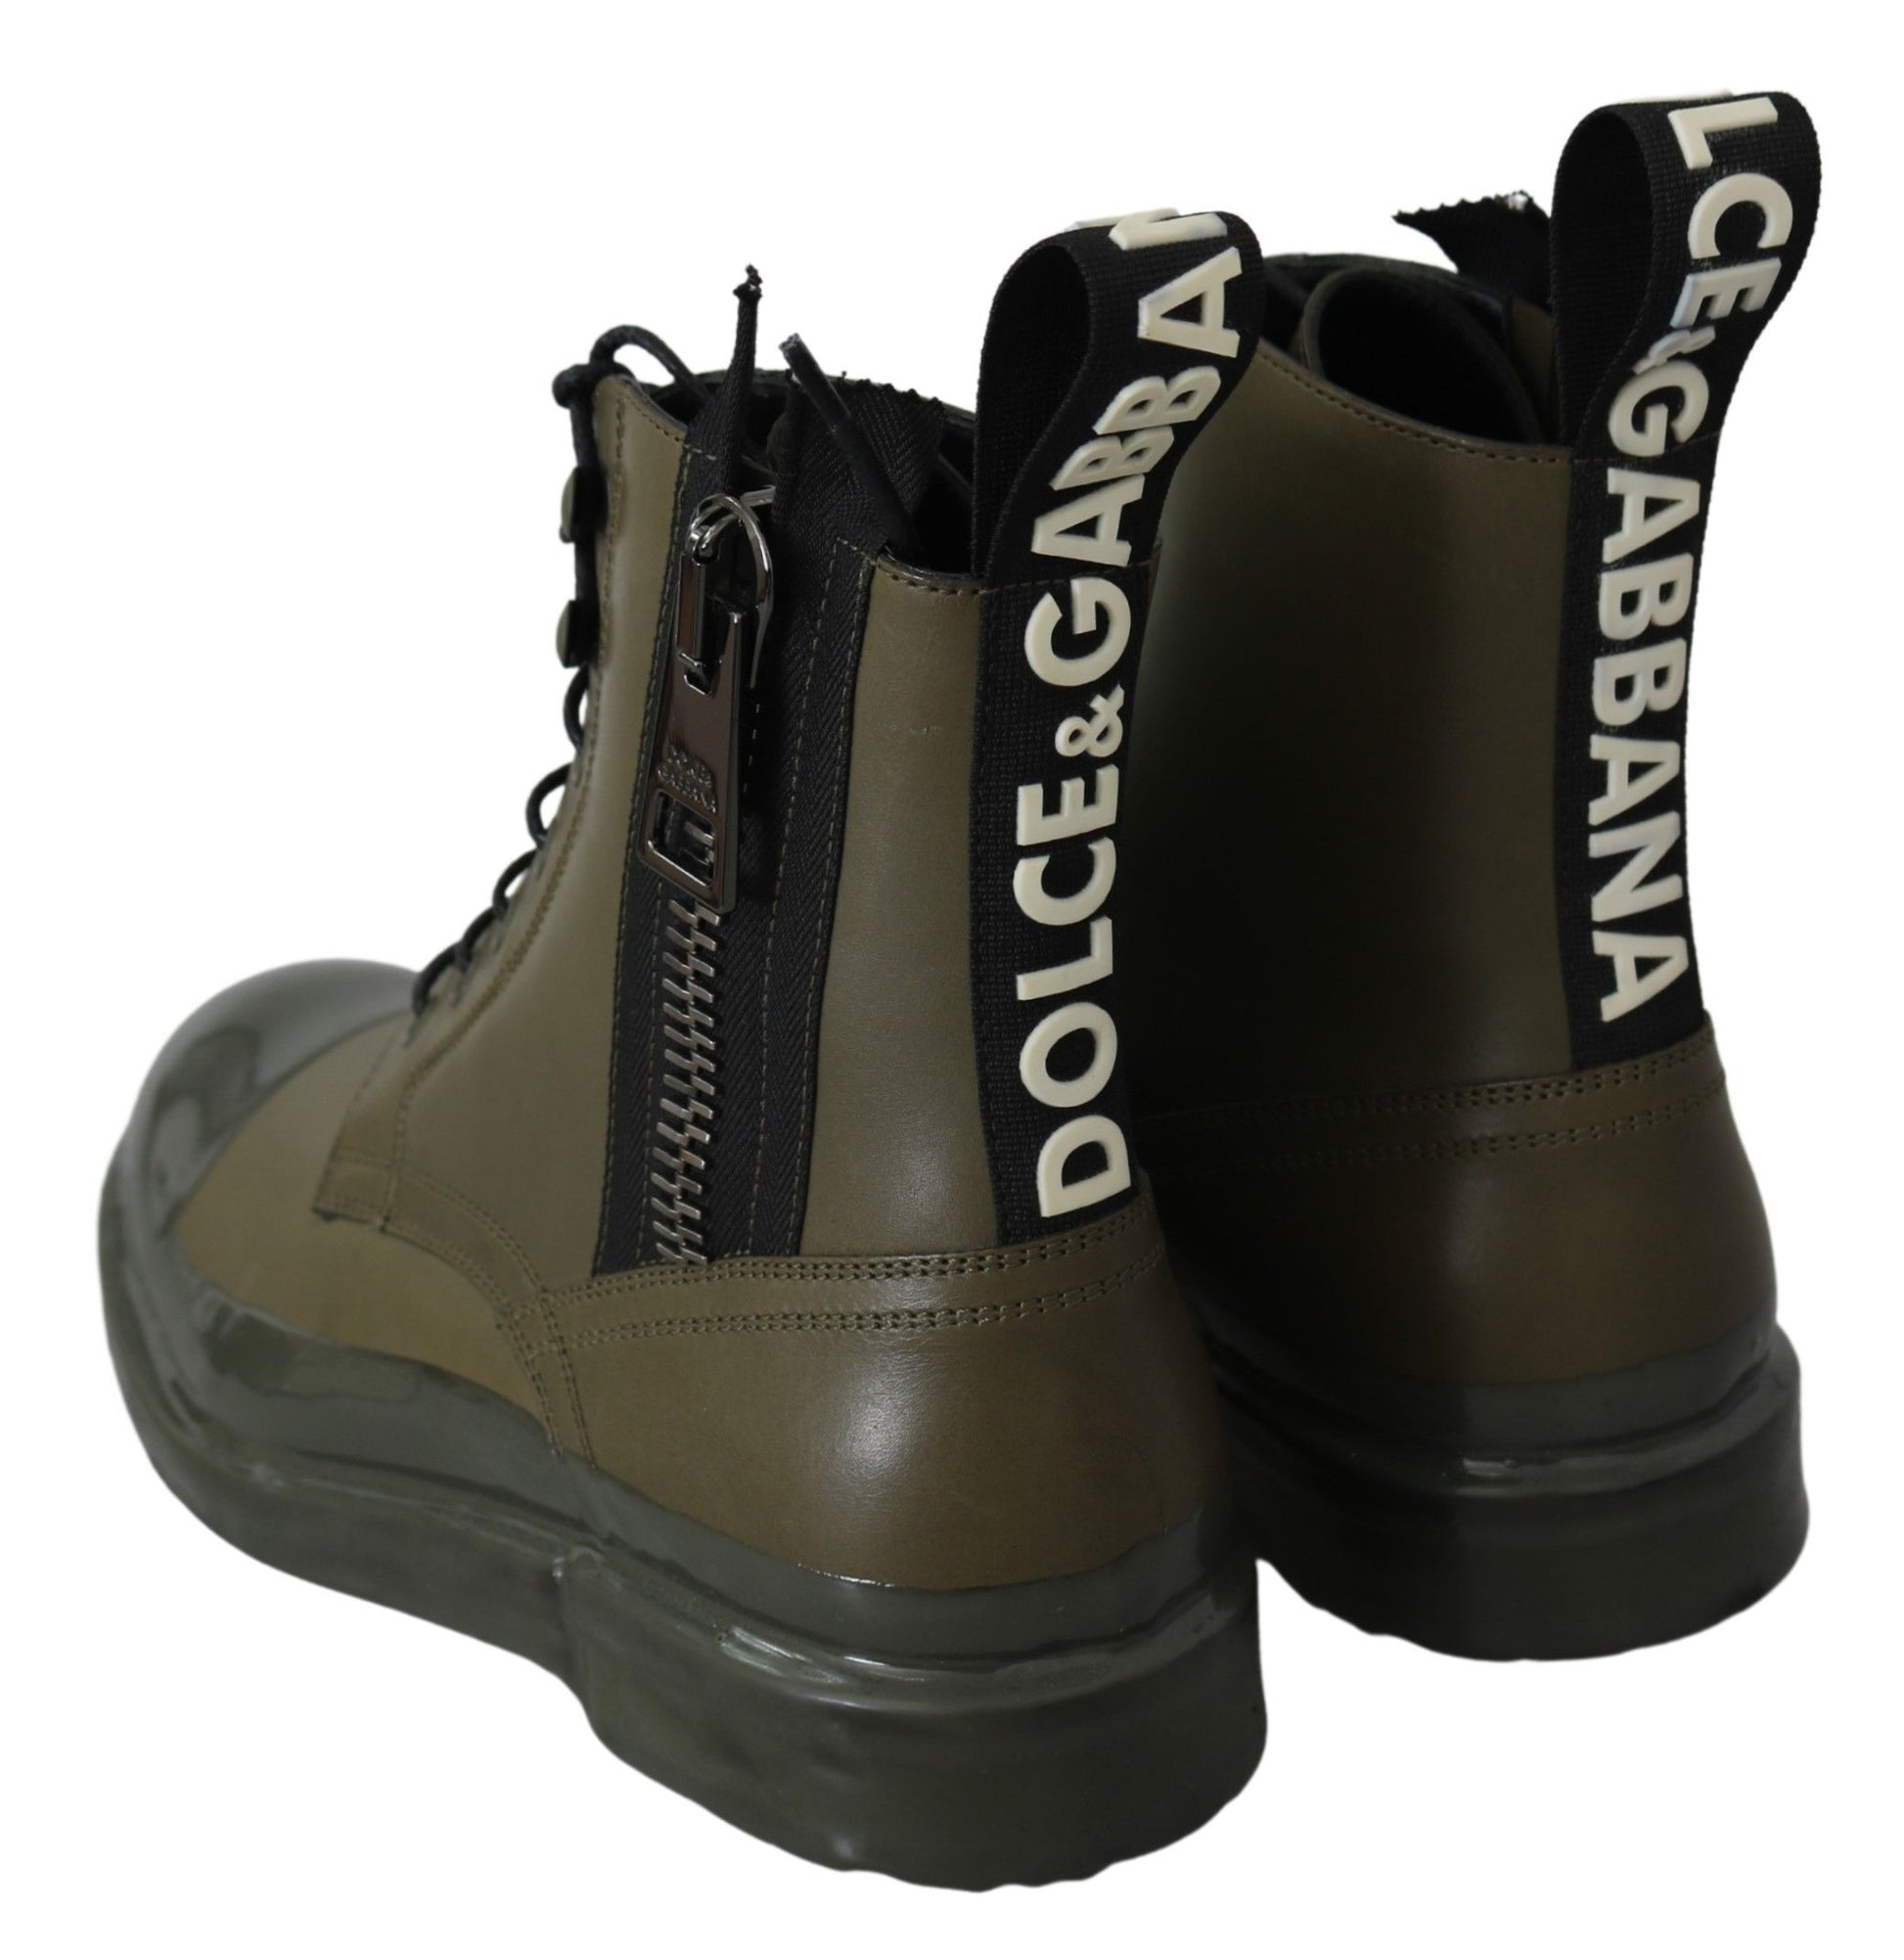 Dolce & Gabbana Green Leather Boots Zipper Mens Shoes - Designed by Dolce & Gabbana Available to Buy at a Discounted Price on Moon Behind The Hill Online Designer Discount Store